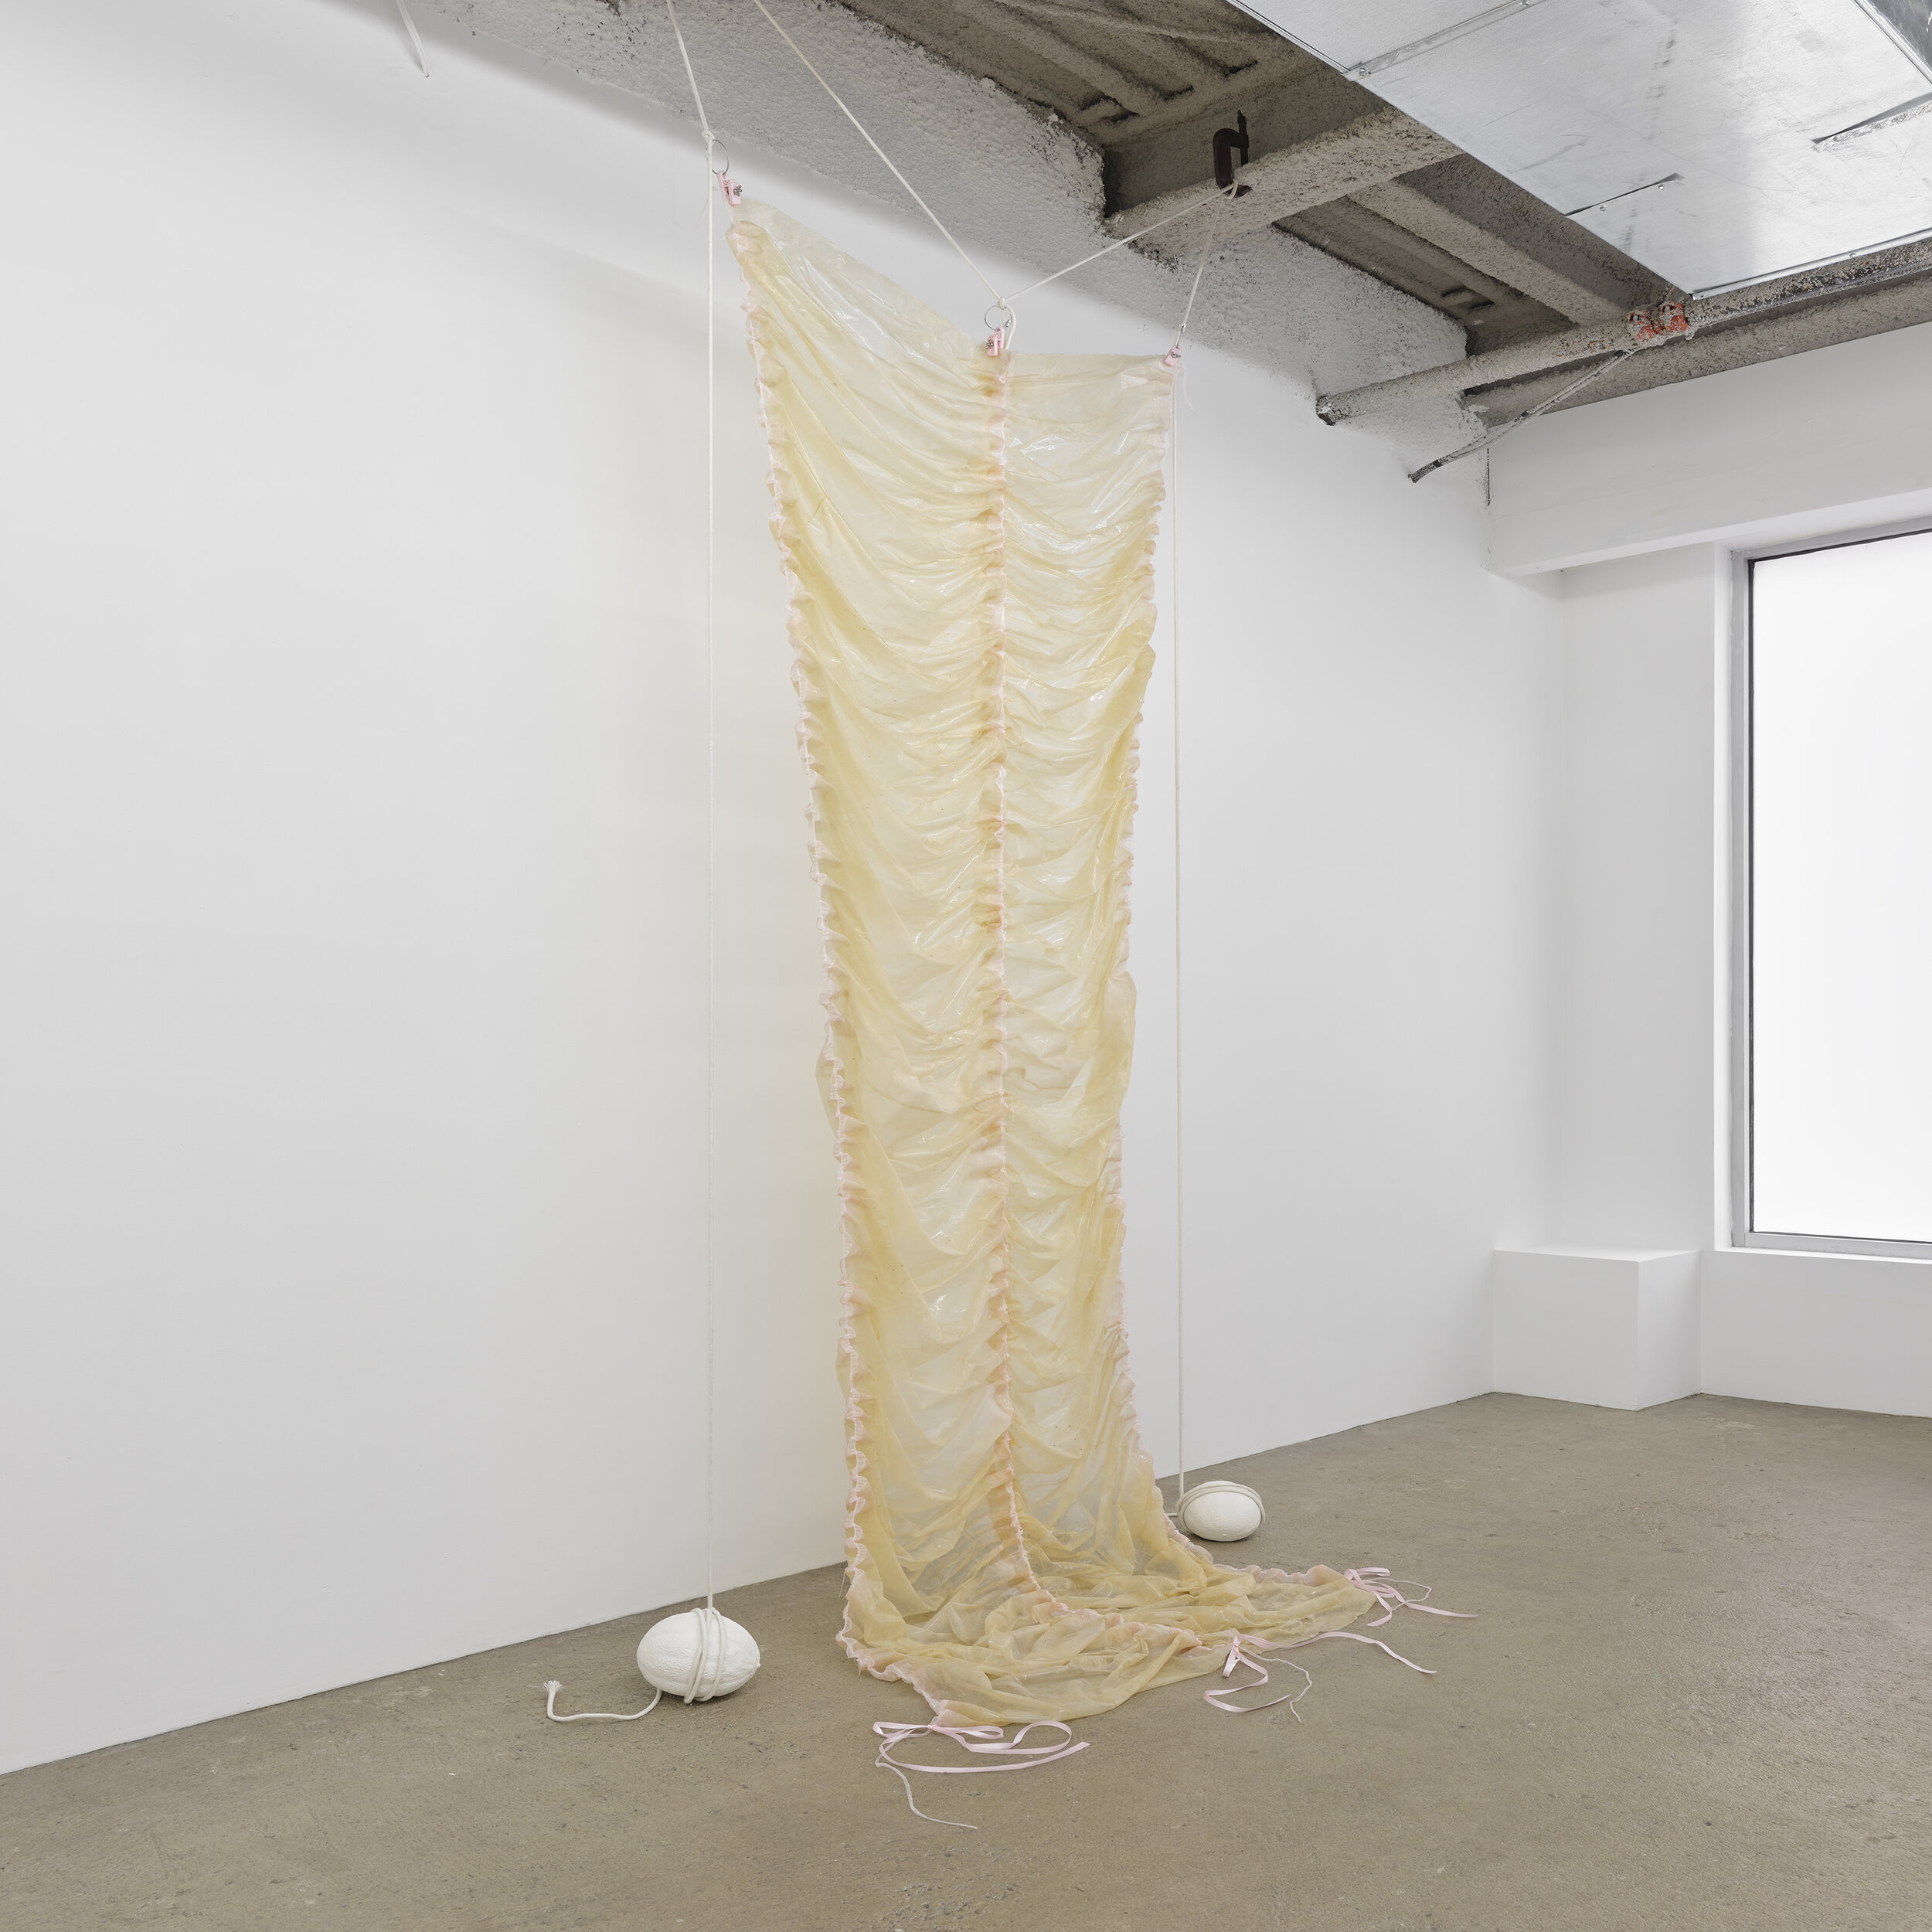  Karinne Smith  Untitled (piece of Pinkie II) , 2021 collagen dyed with soda, silicone, baby powder, ribbon,  scrotum clamps, cotton rope, cast plaster melons 124 x 52 x 36 inches (310 x 132 x 91 cm) (KS1) 